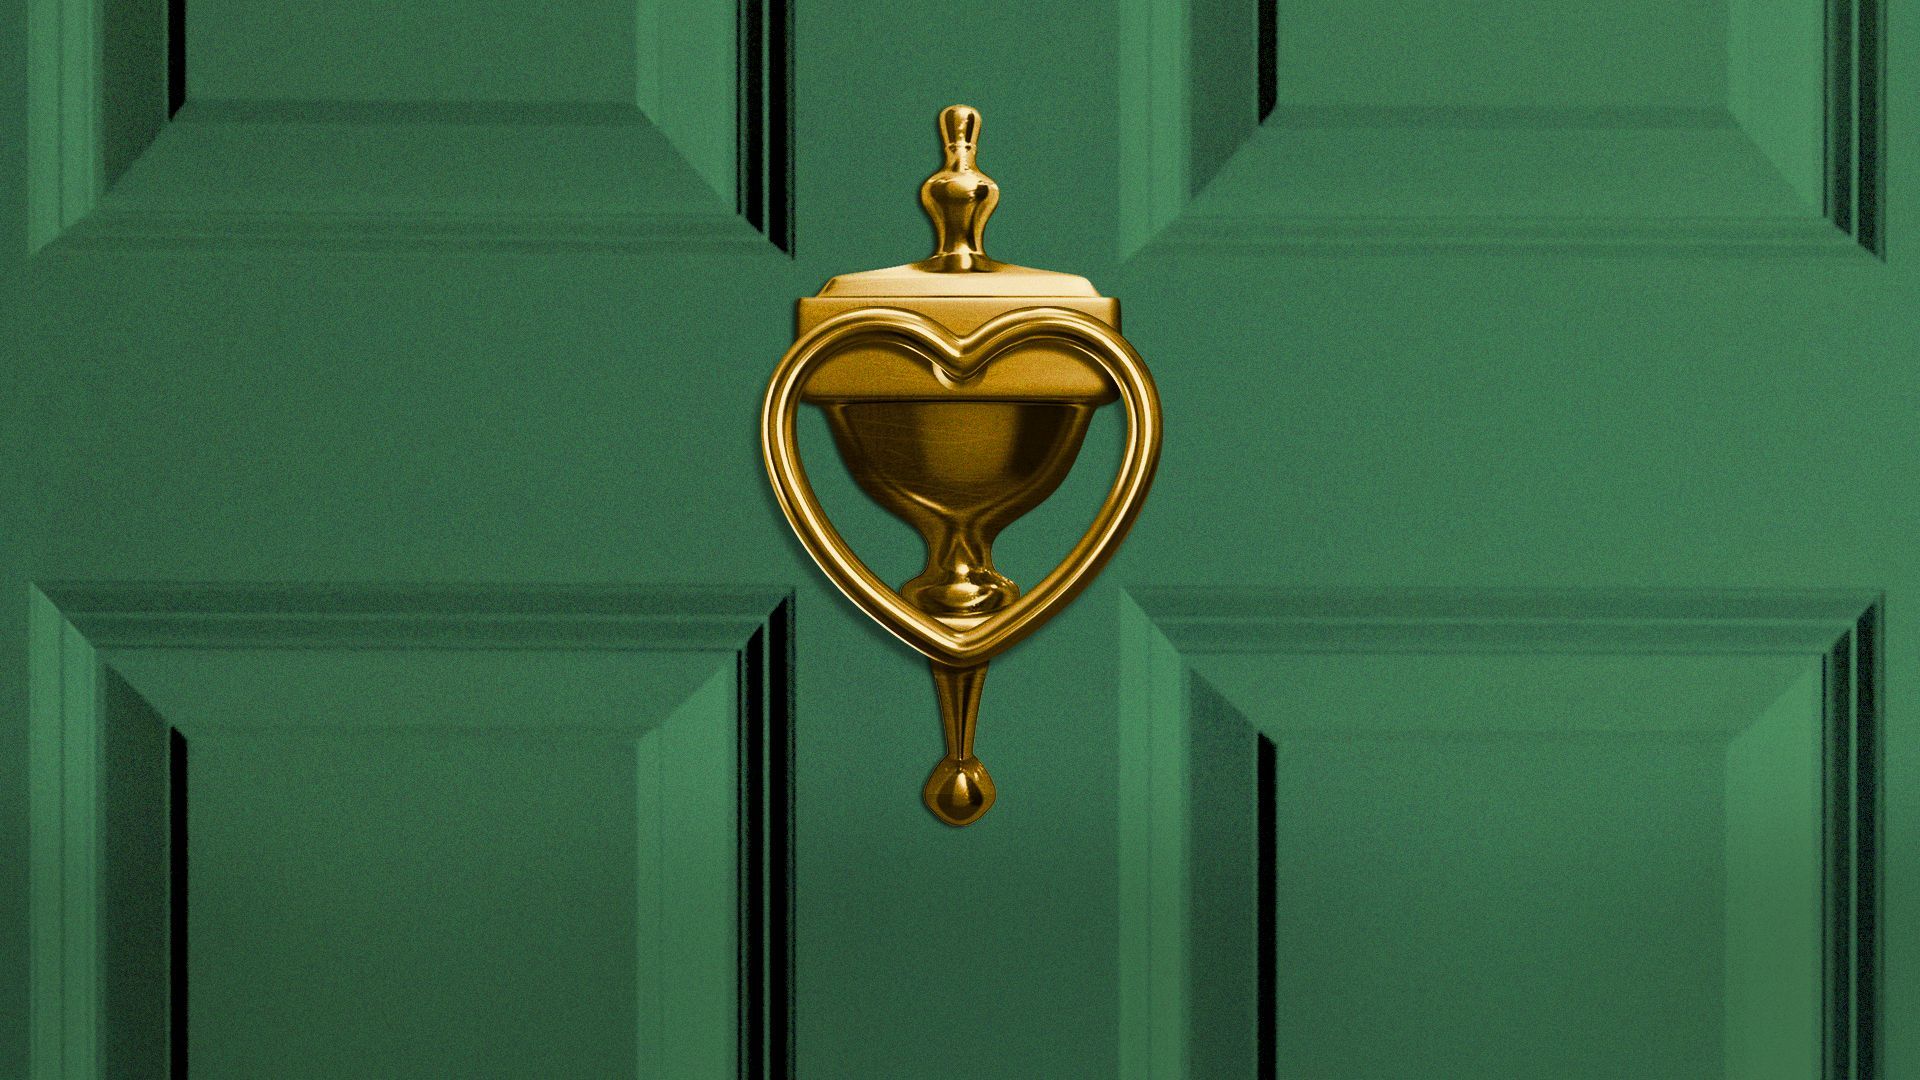 Illustration of a door knocker in the shape of a heart.